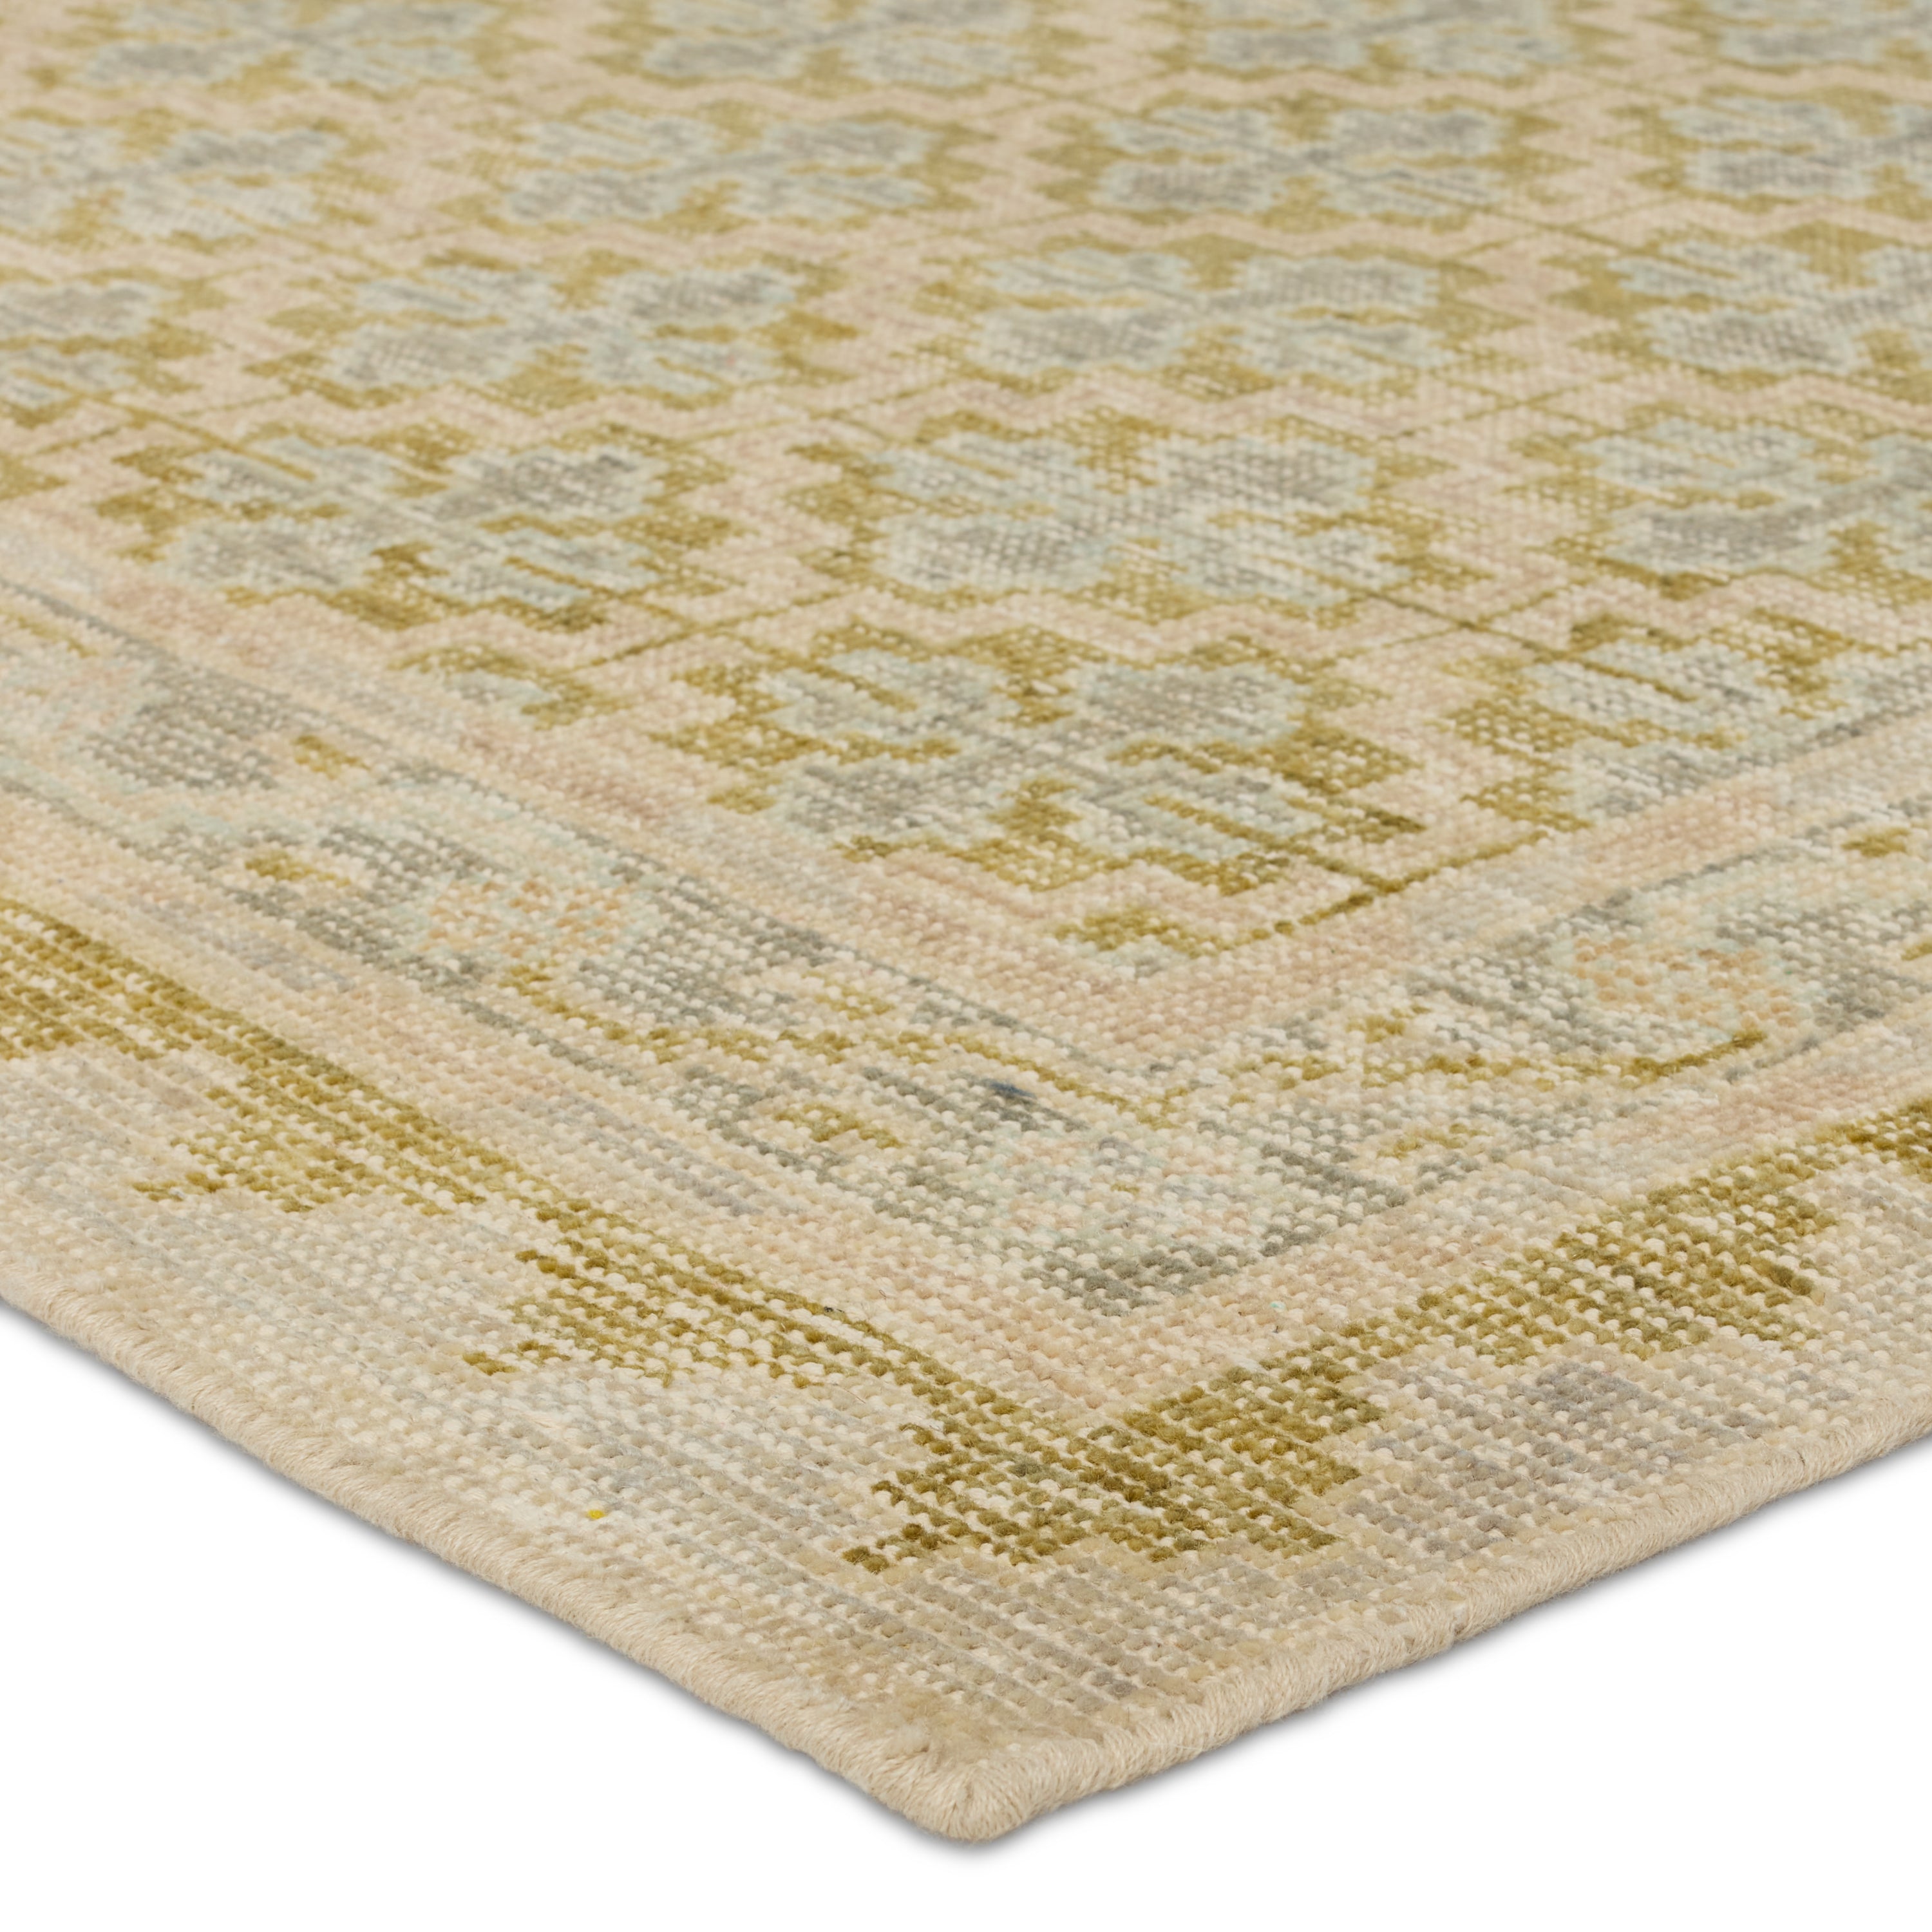 The Onessa collection marries traditional motifs with soft, subdued colorways for the perfect blend of fresh and time-honored style. These hand-knotted wool rugs feature a hand-sheared quality that lends the design a coveted vintage impression. The Mildred rug features a tile and mini-medallion pattern in hues of blue, green, cream, taupe, and gray. Amethyst Home provides interior design, new construction, custom furniture, and area rugs in the Calabasas metro area.